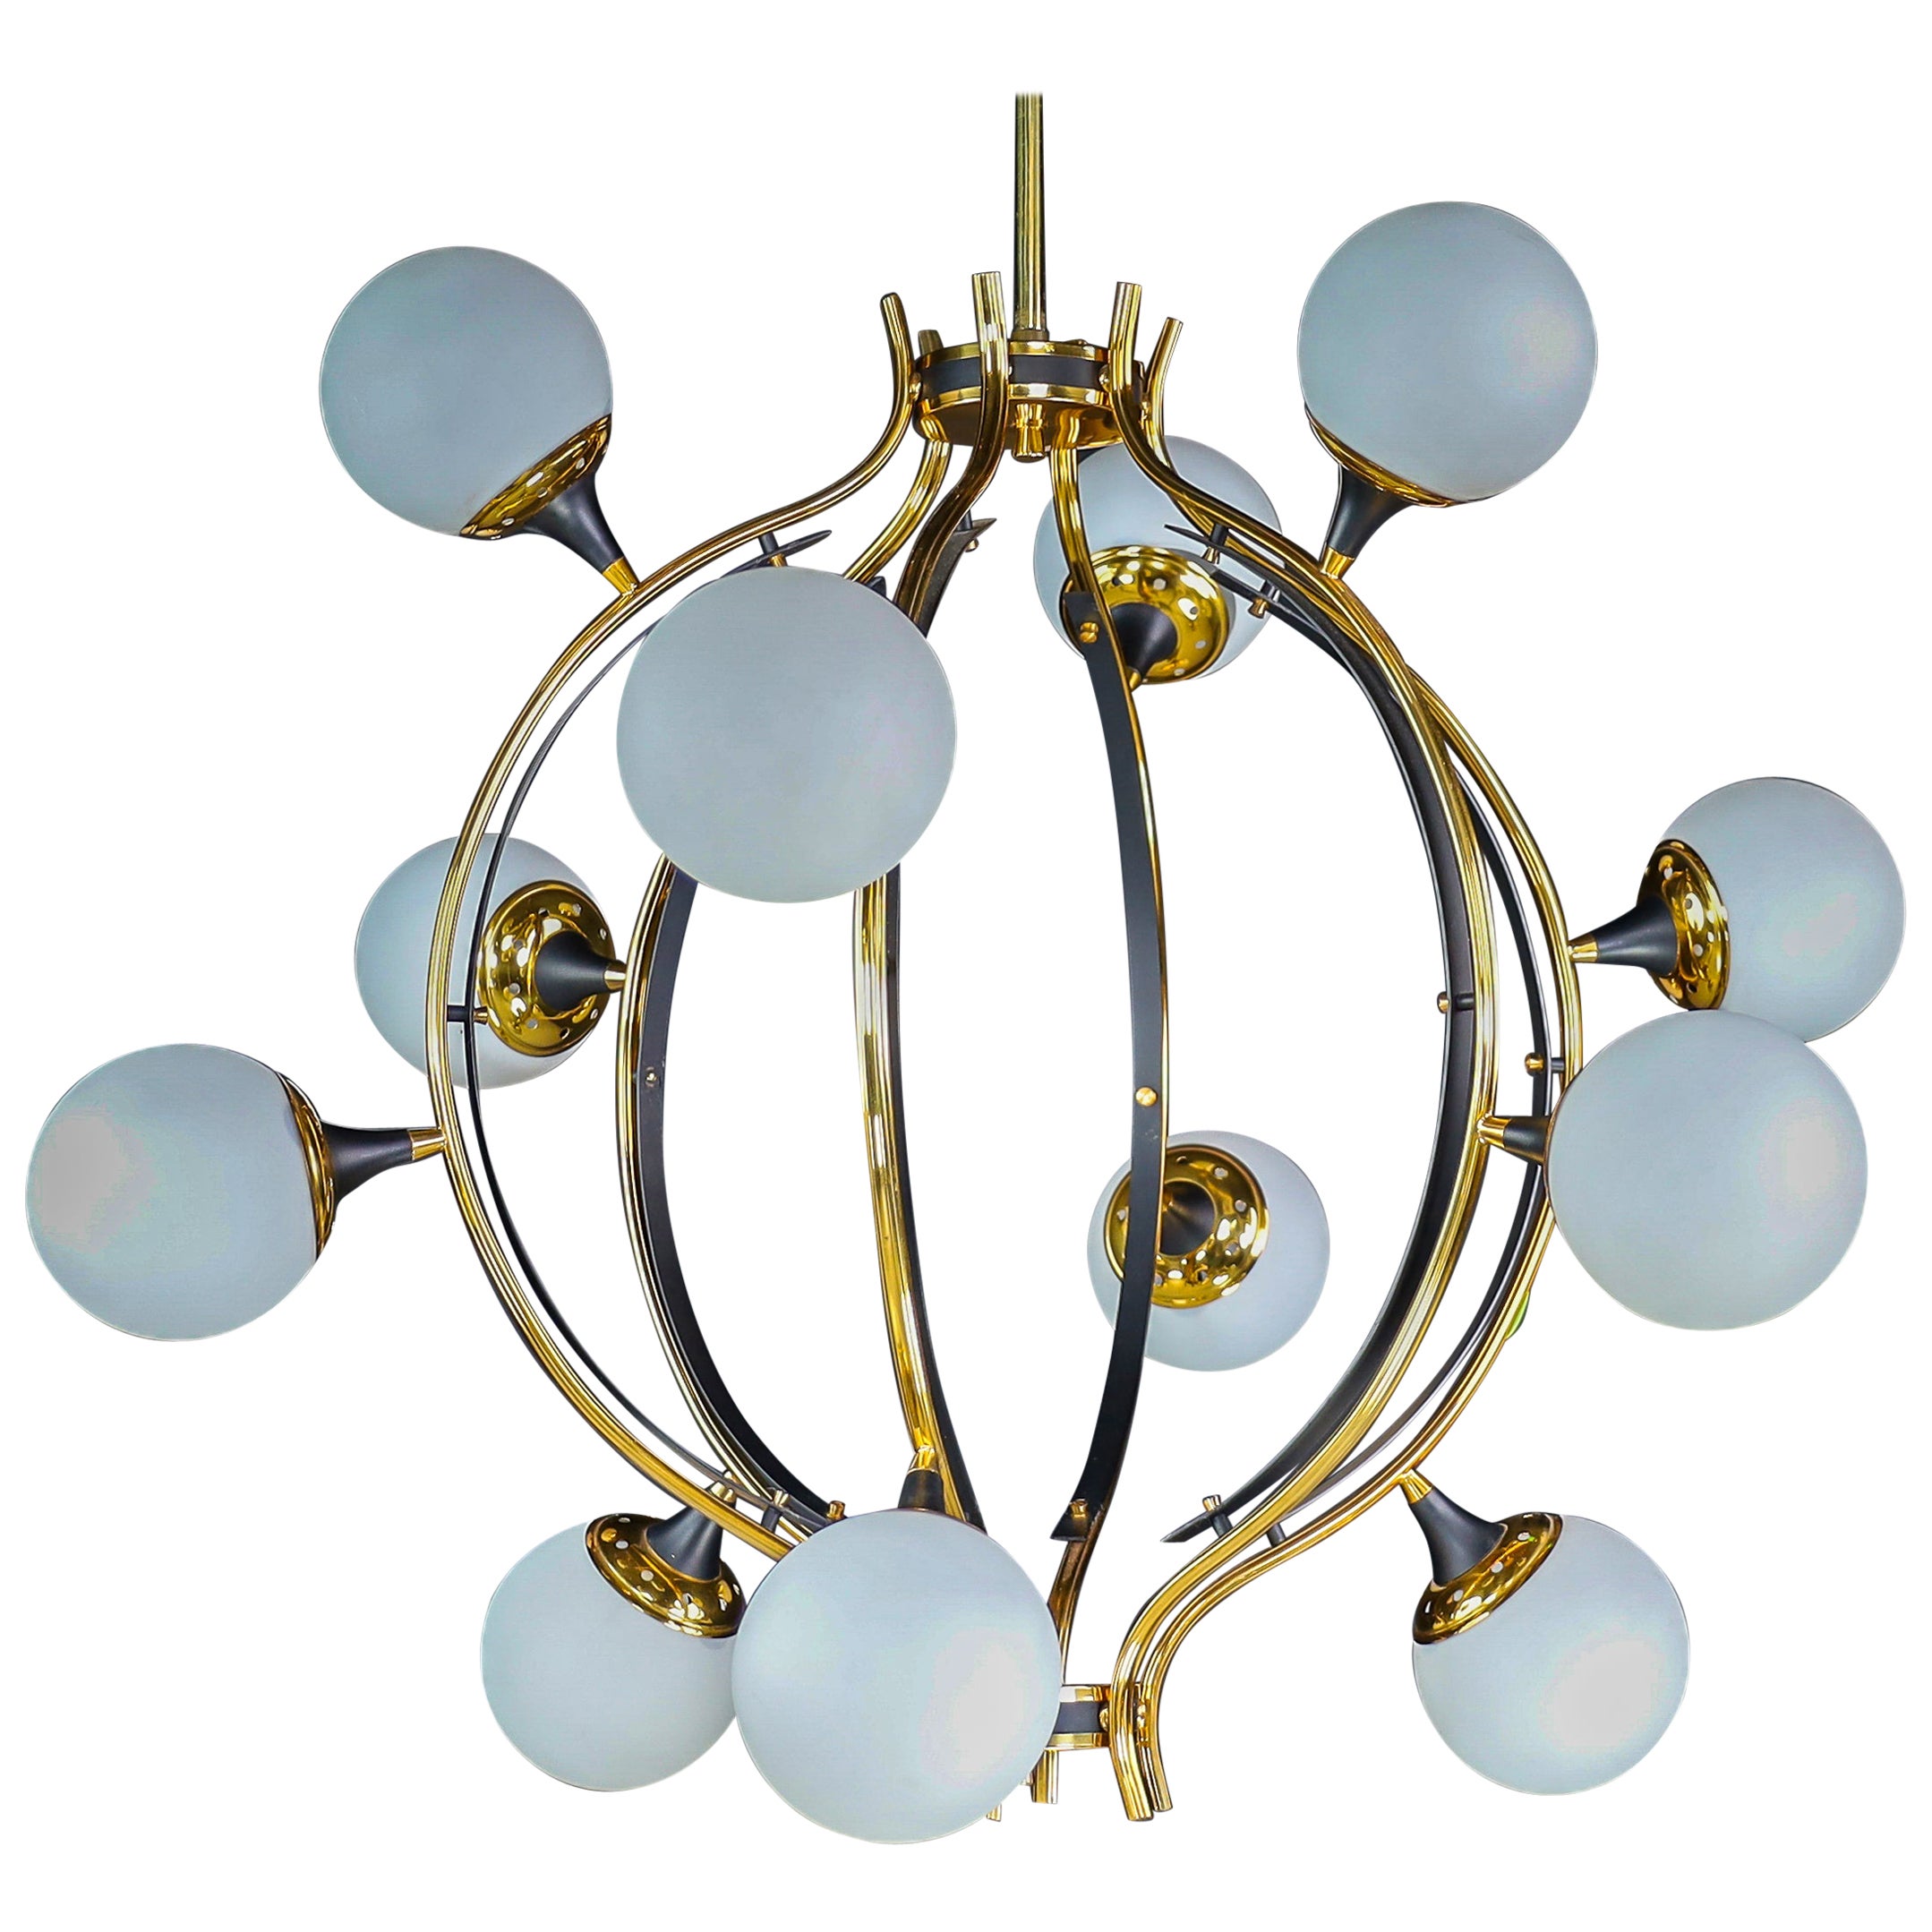 Midcentury Stilnovo Chandelier in Brass and 12 Opaline Globes, Italy 1950s For Sale